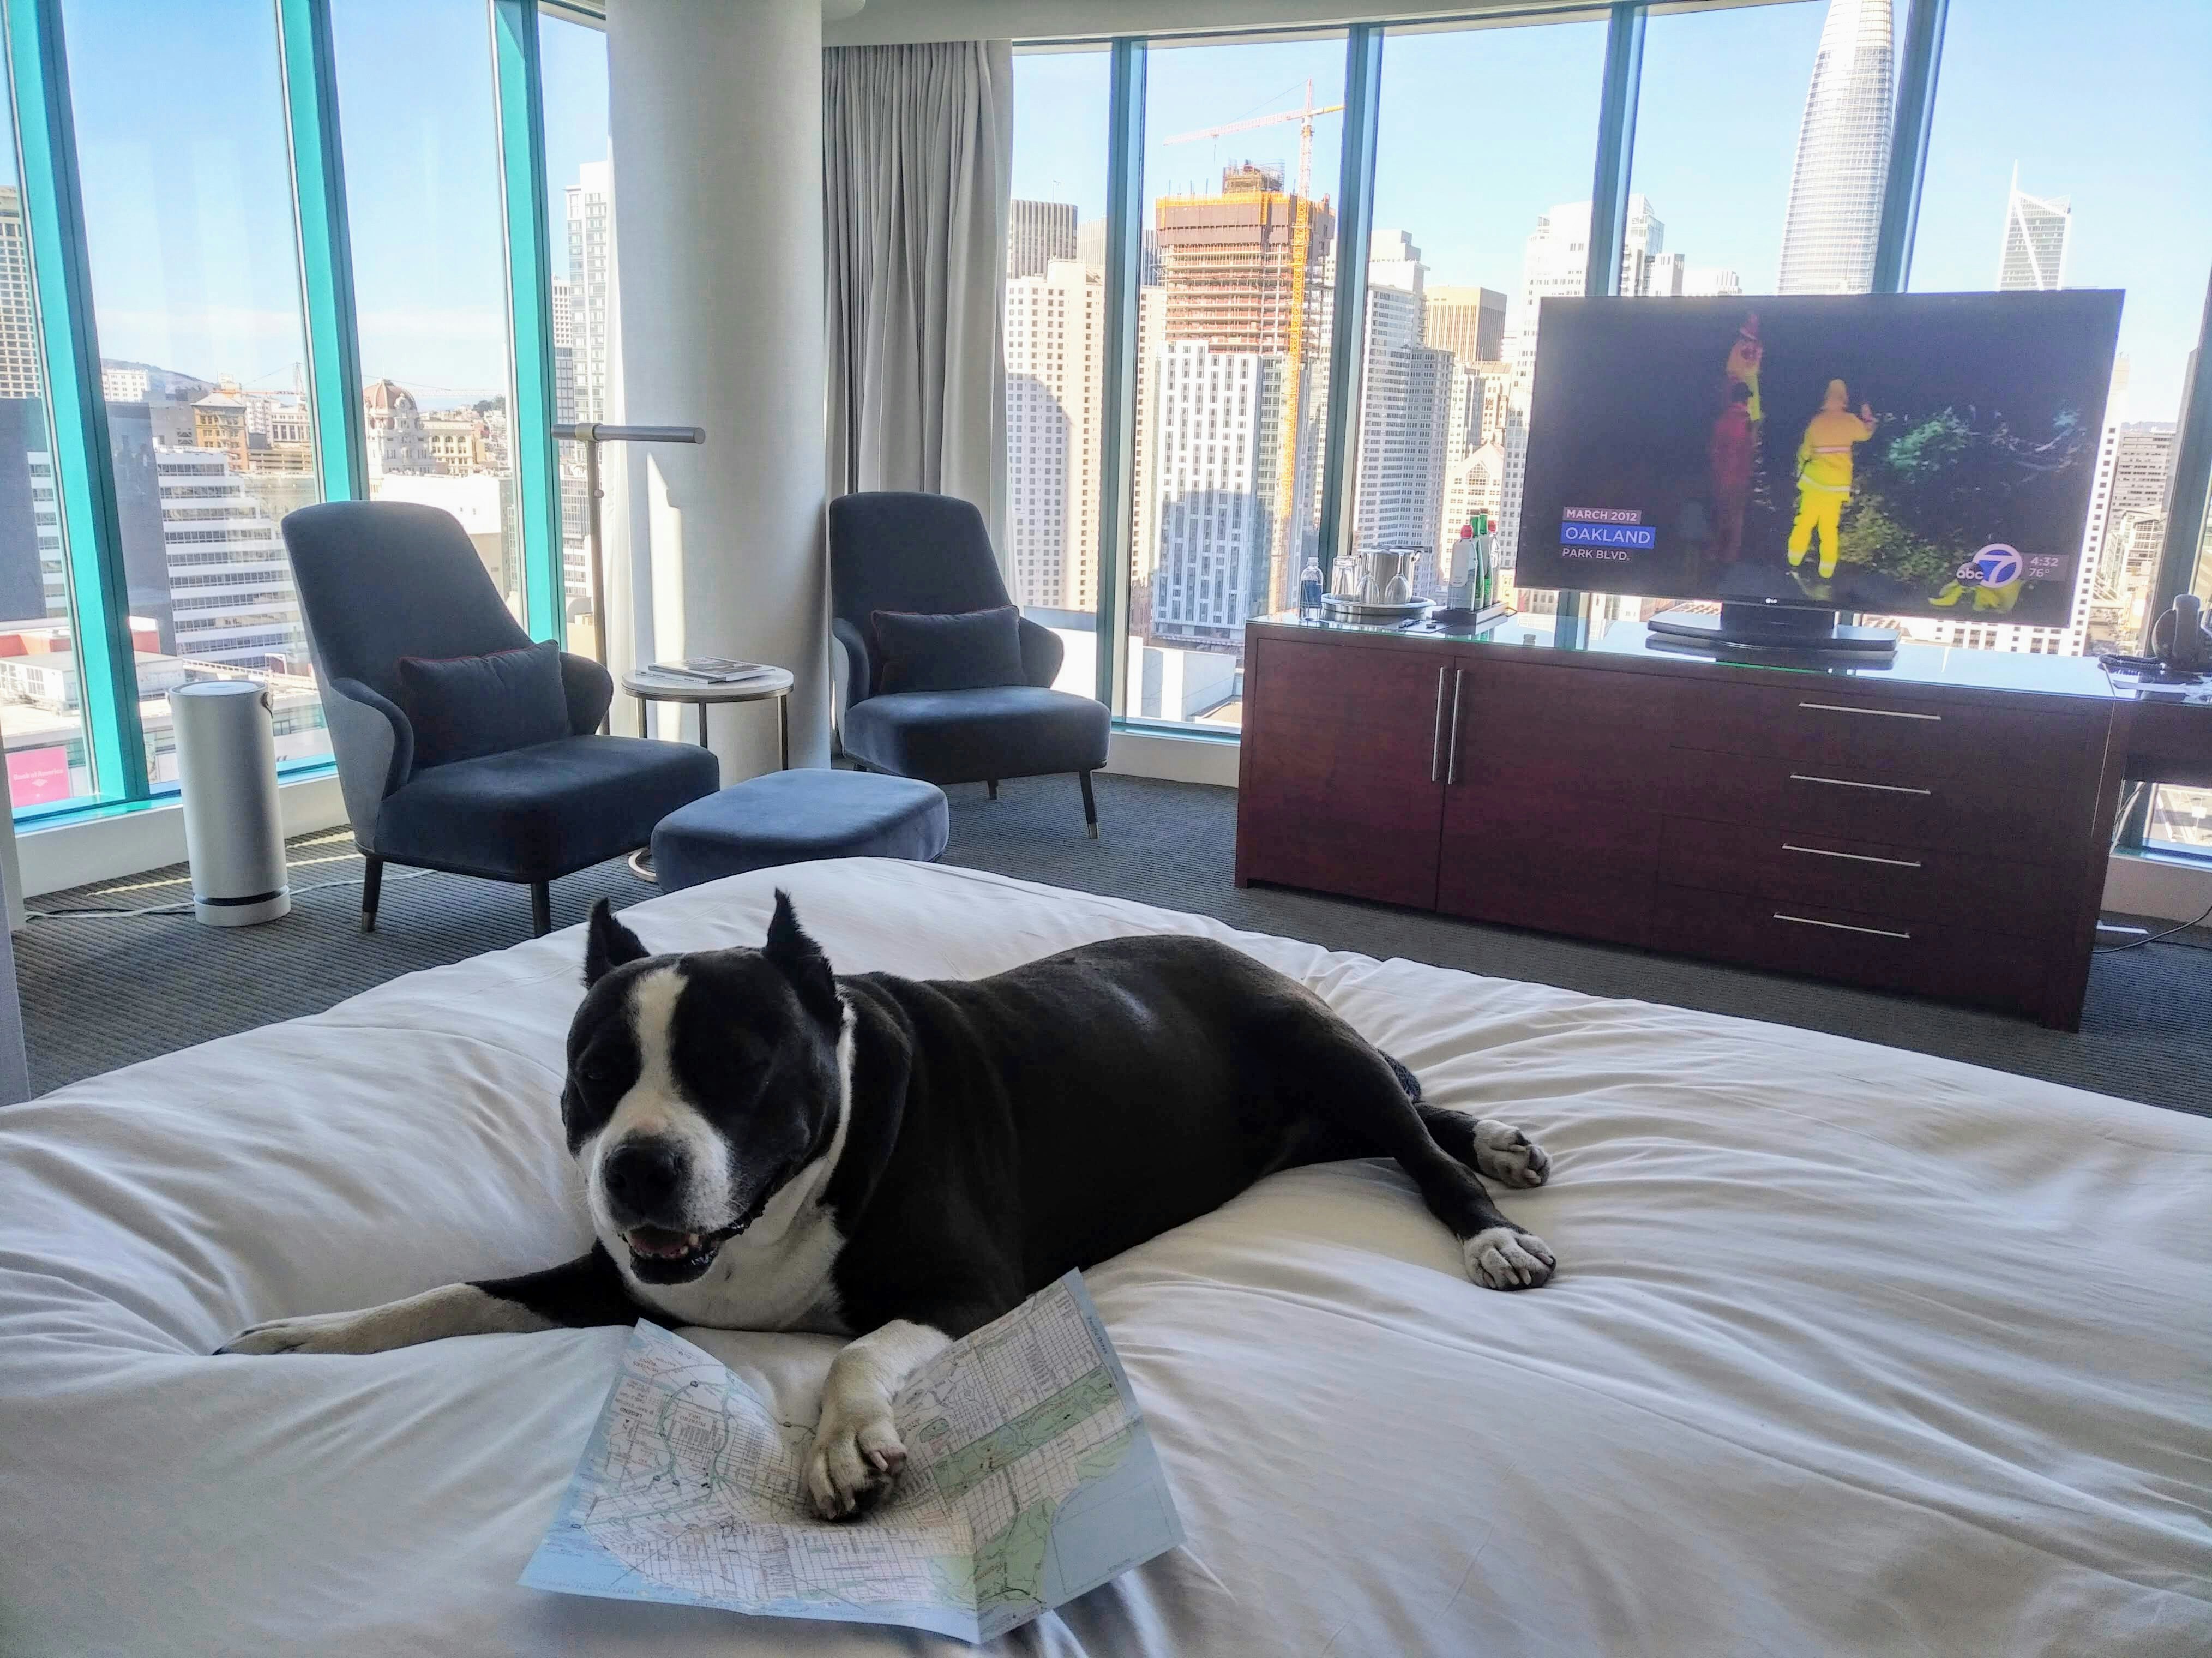 A black and white dog lounges on the bed at the InterContinental hotel in San Francisco. In the corner of the room are two grey modernist chairs with an ottoman and side table. A credenza with a TV is across from the bed. Windows make up the walls of the room with views of the San Francisco skyline, including City Hall to the left and and the Transbay Tower